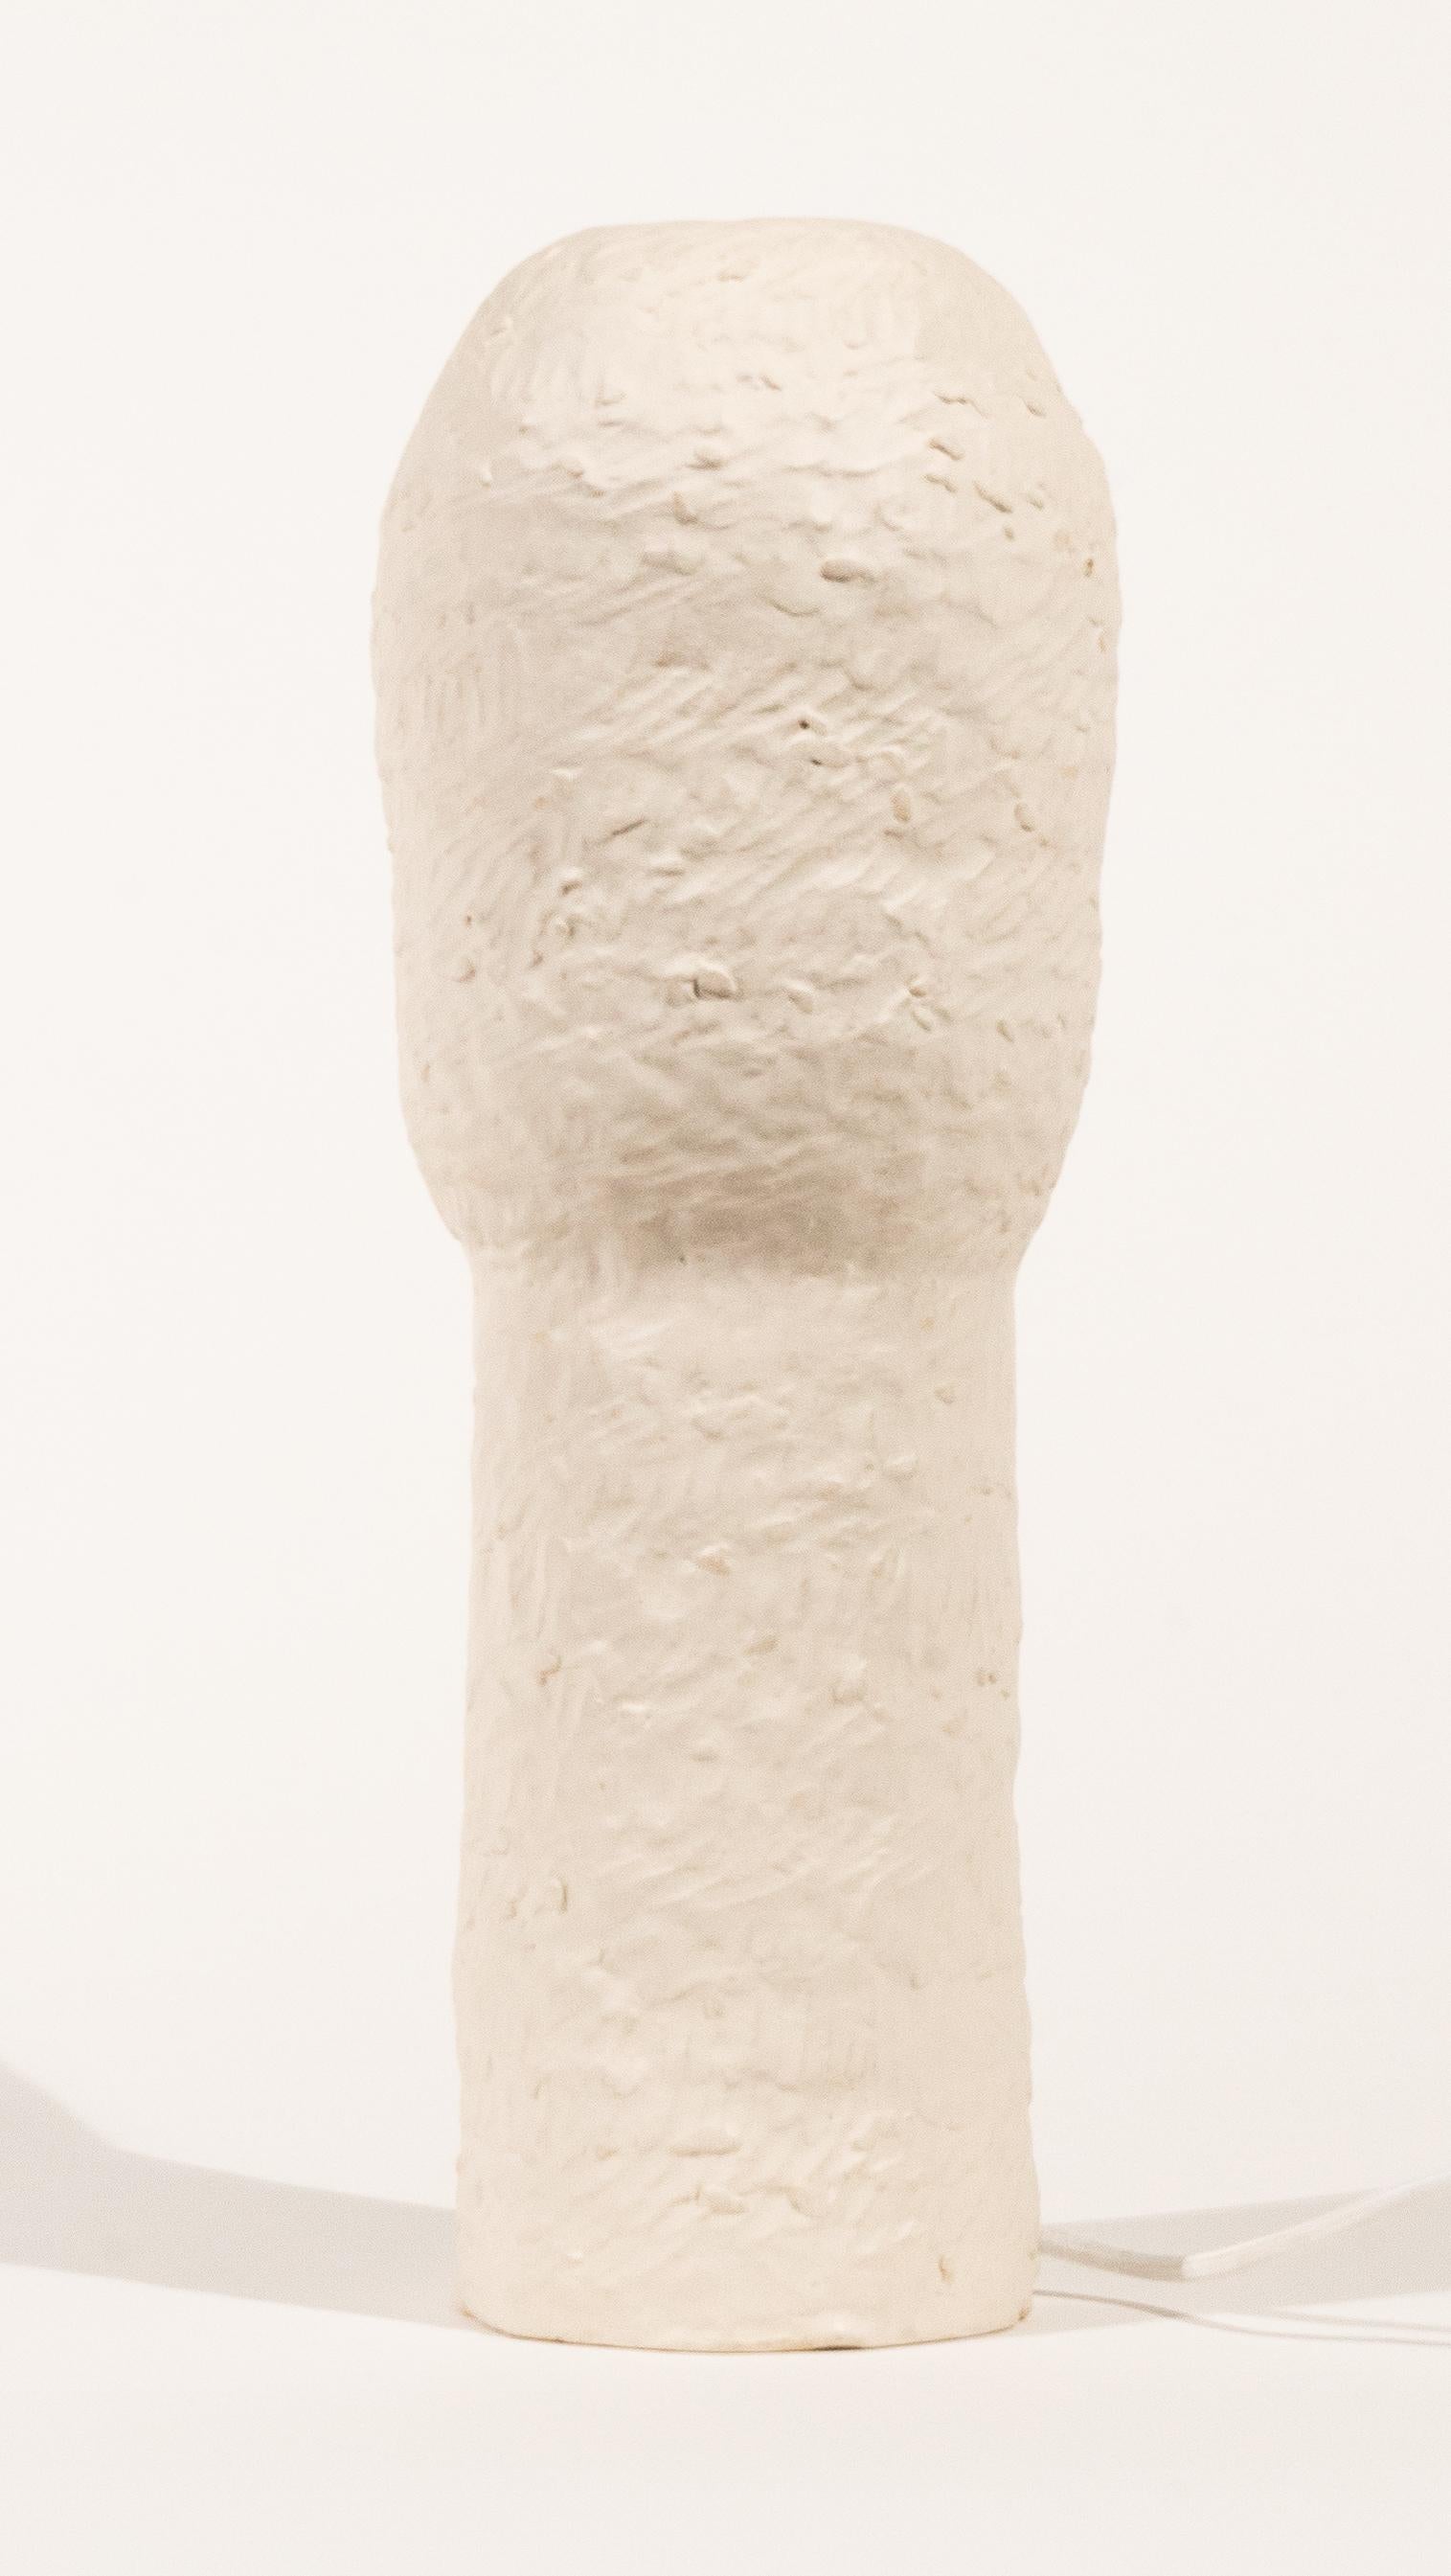 White chamotte stoneware table lamp created by Claire Cosnefroy in 2022. Unique piece, signed, and dated. US and UK electrical wiring available upon request.

Claire Cosnefroy was born in Cotentin in Normandy, from where she keeps a taste for